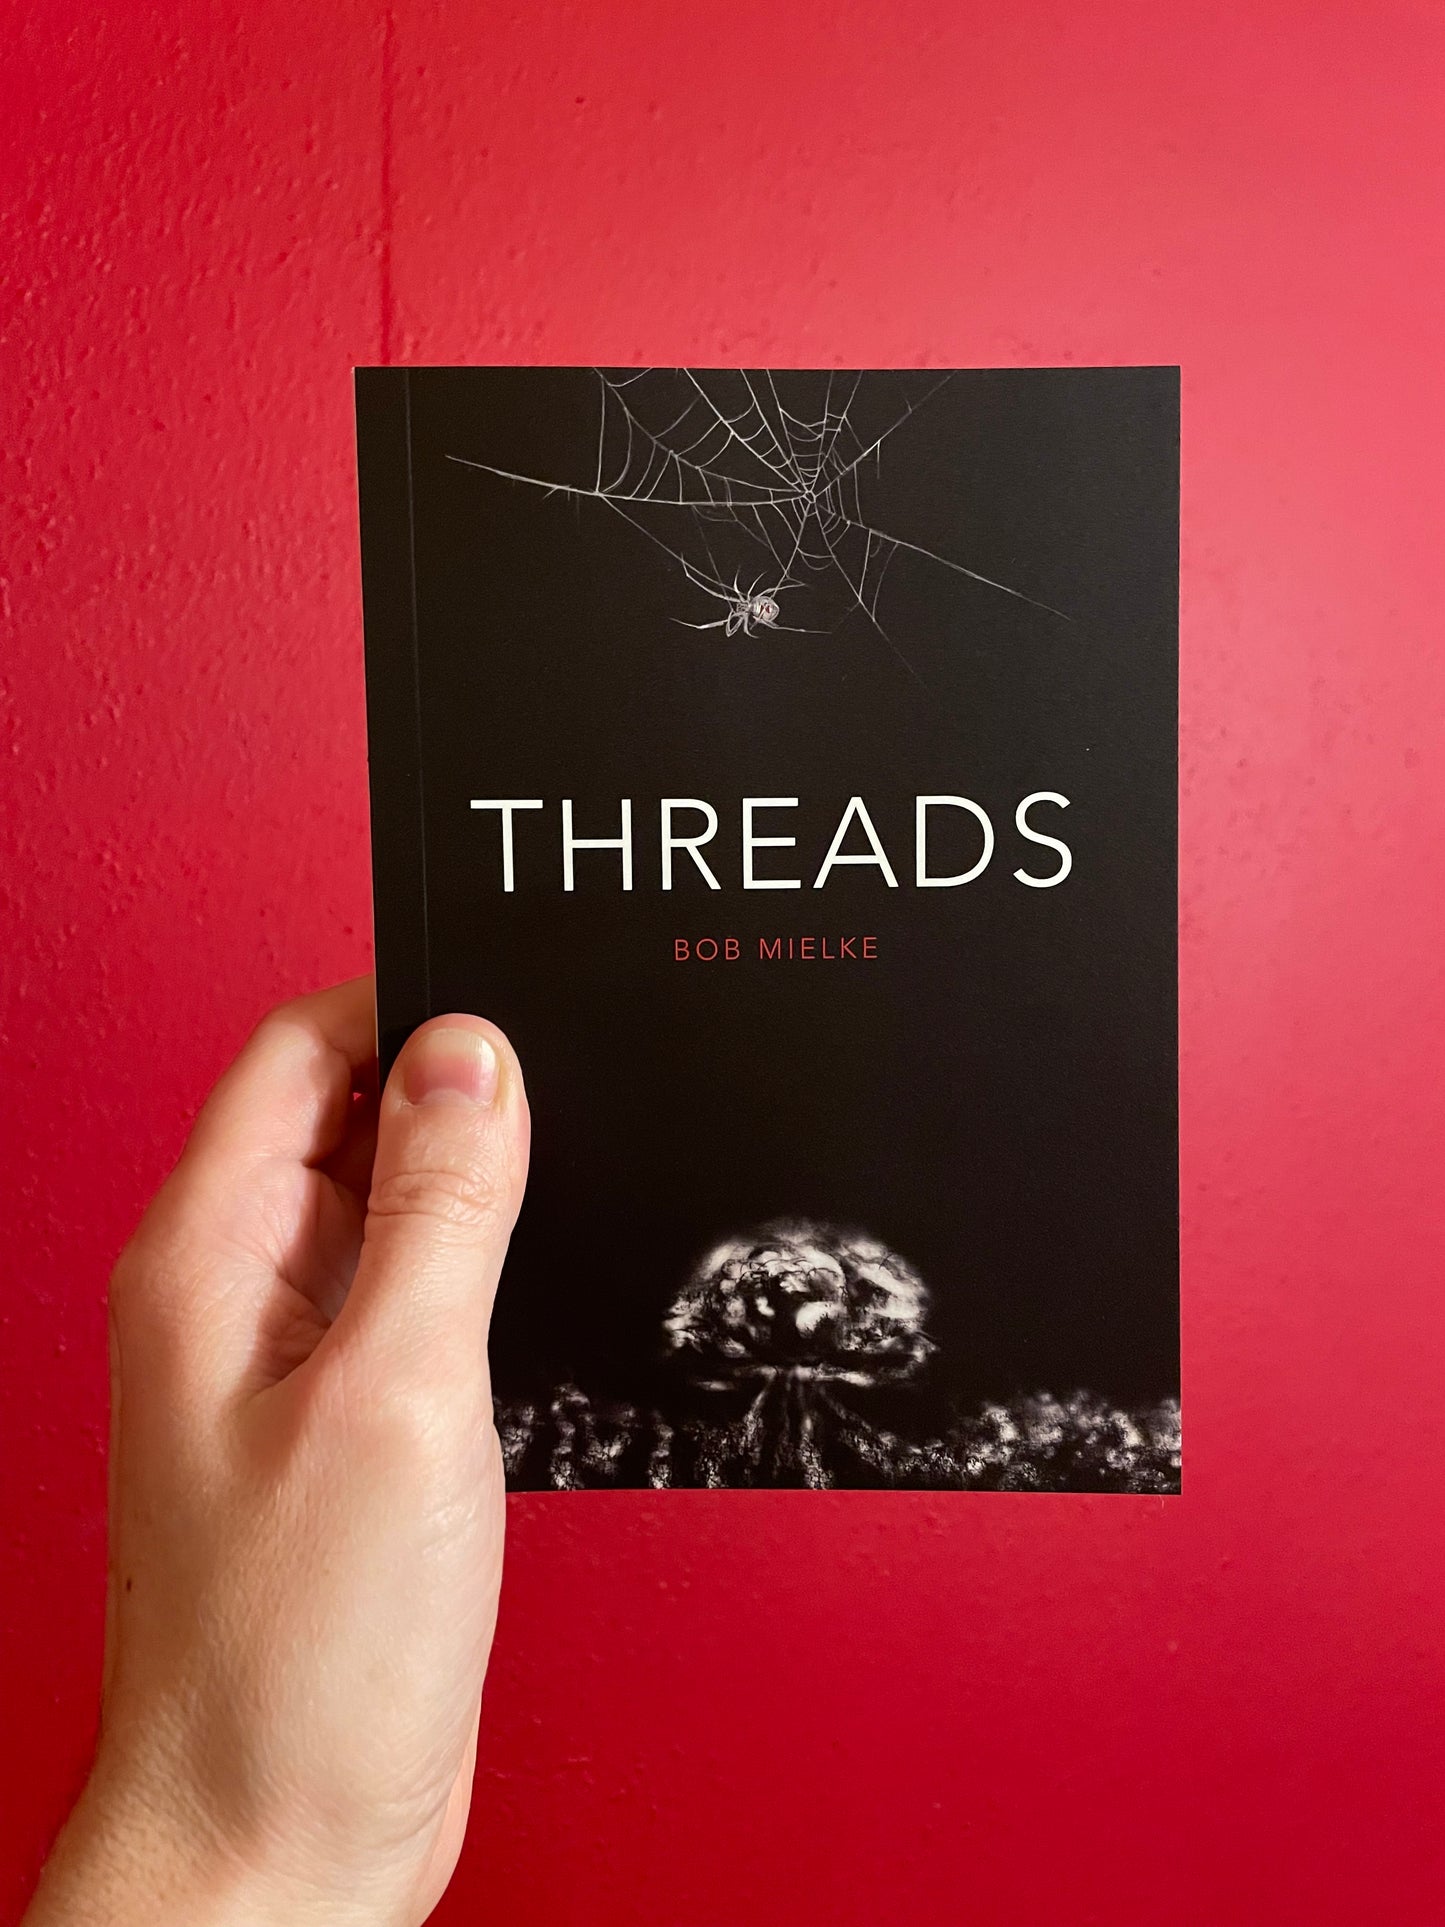 Image of hand holding a Threads book, with the cover facing the camera